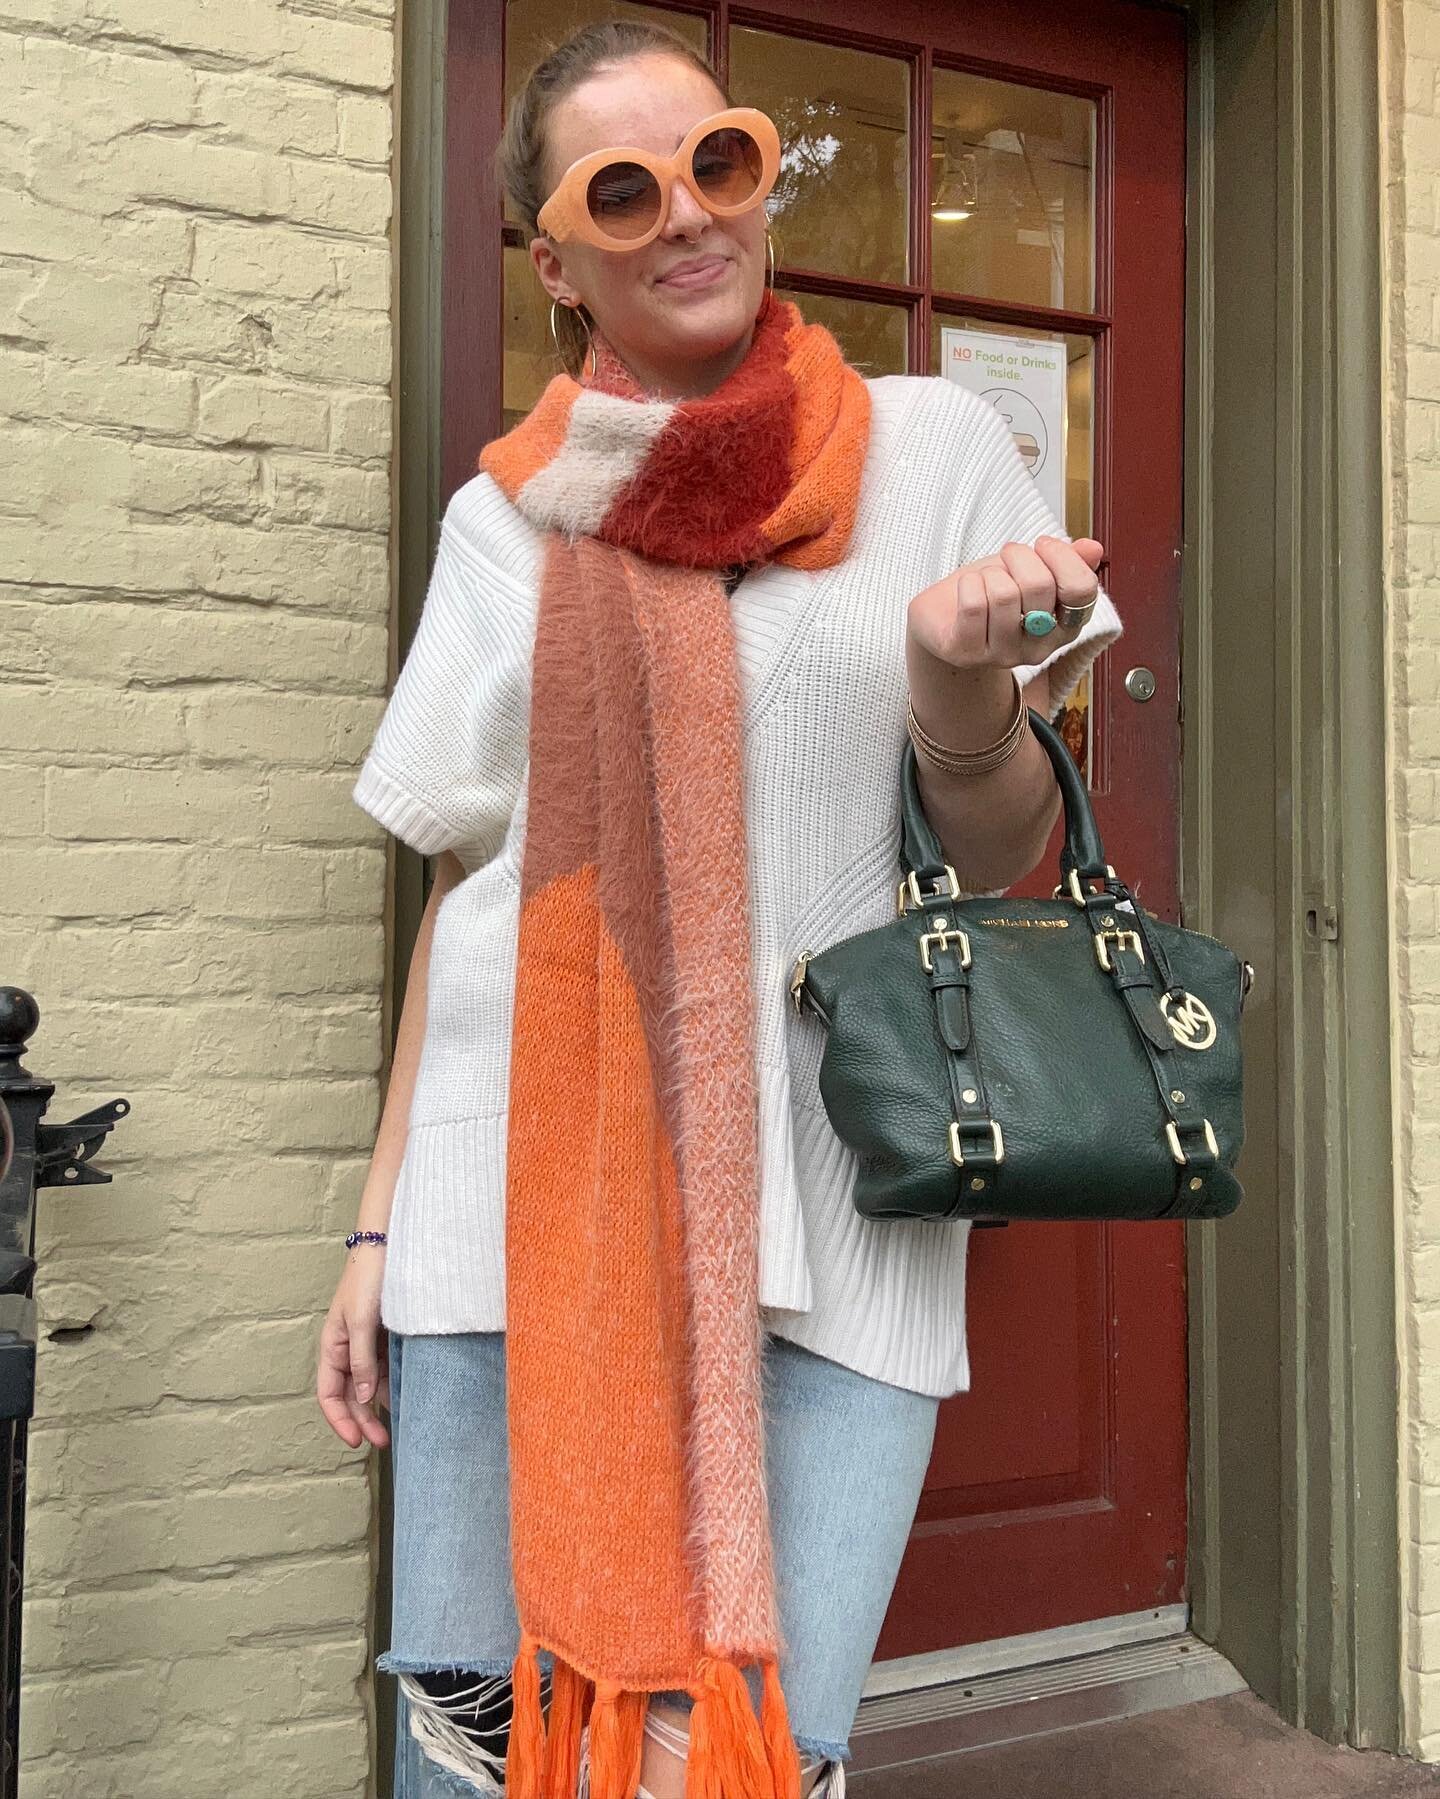 We&rsquo;ll take every fall color please!!! 🥰🧣🧡🍂

Come shop our new fall/winter accessories and consignments in store! ◡̈ 

Sweater vests, cashmere, scarves, hats, sunglasses, boots, bags, we&rsquo;ve got it all!!

This green bag is only $36.95 ?